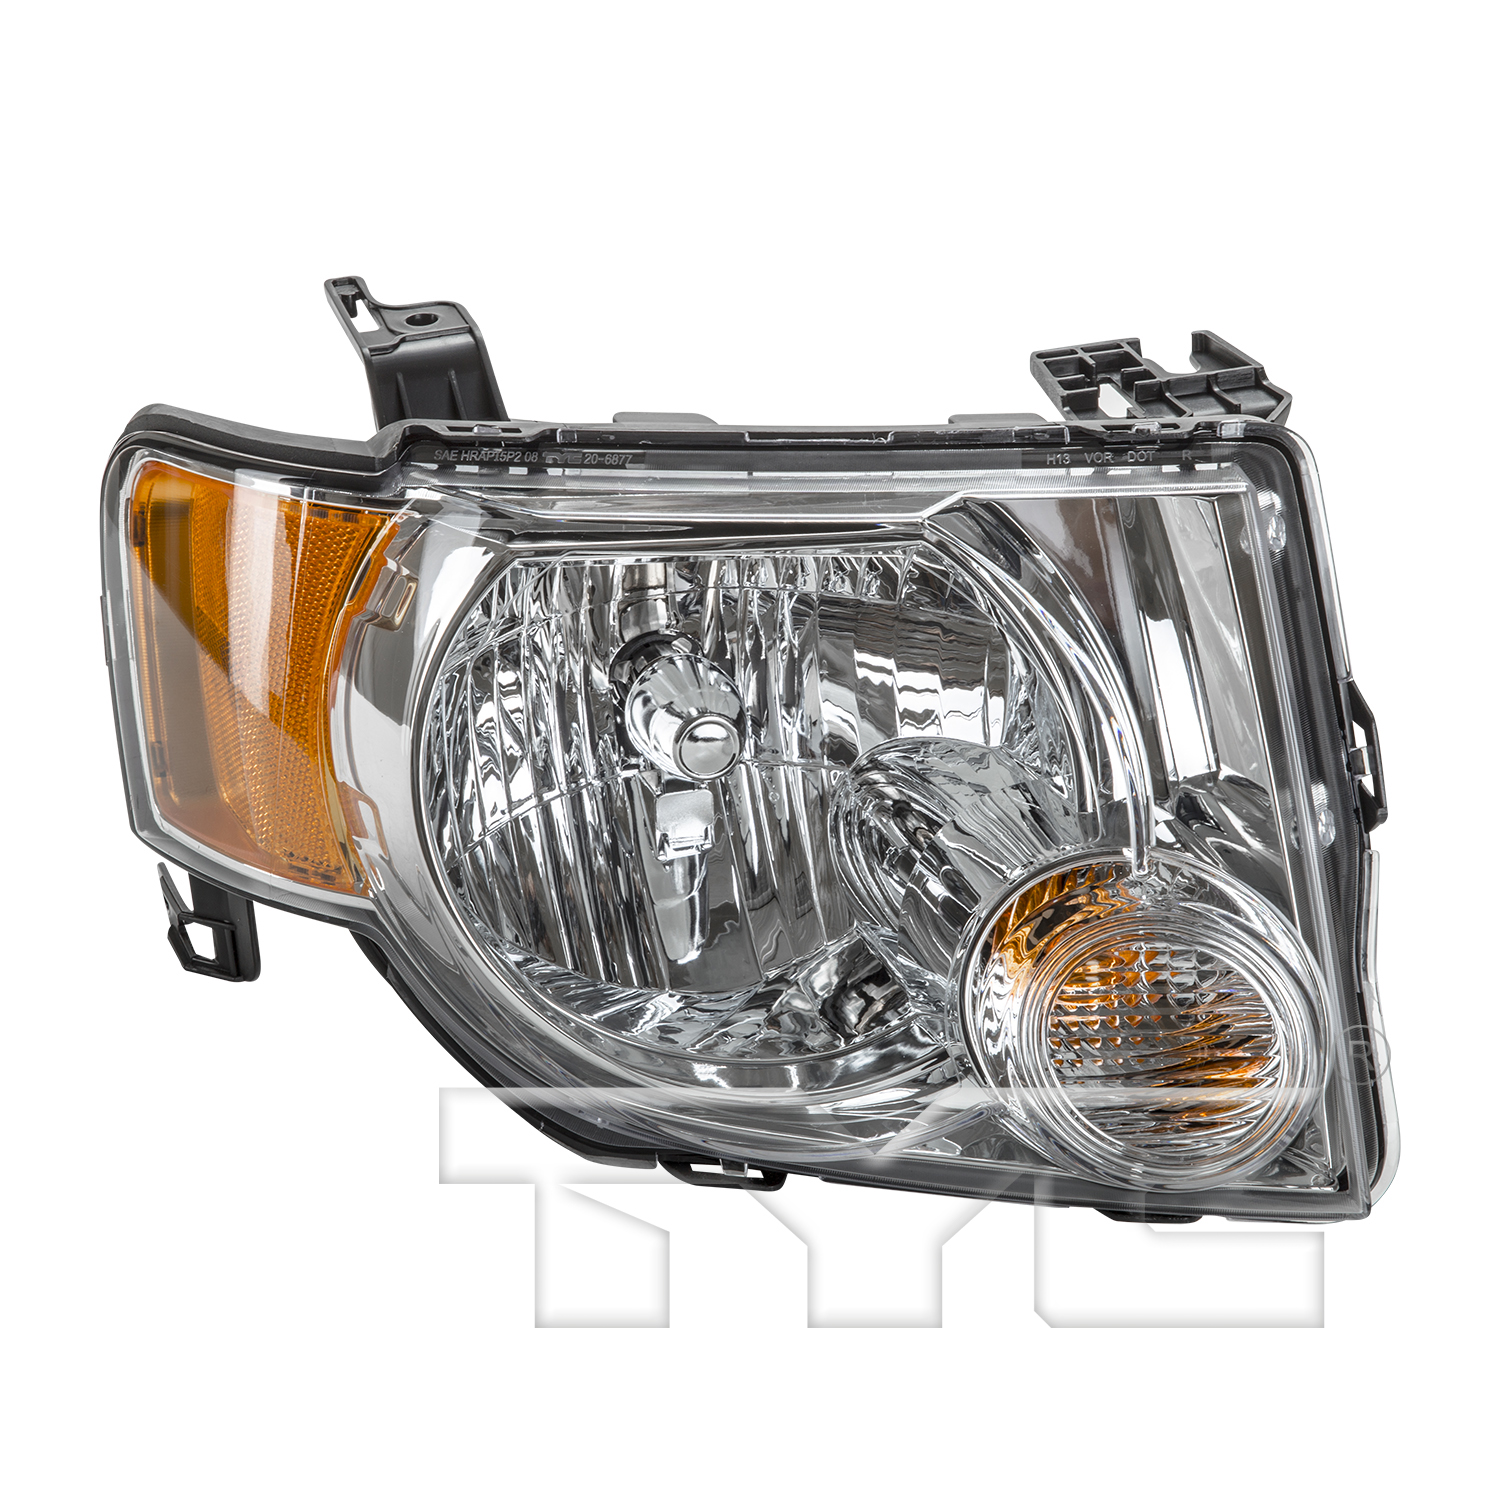 Aftermarket HEADLIGHTS for FORD - ESCAPE, ESCAPE,08-12,RT Headlamp assy composite